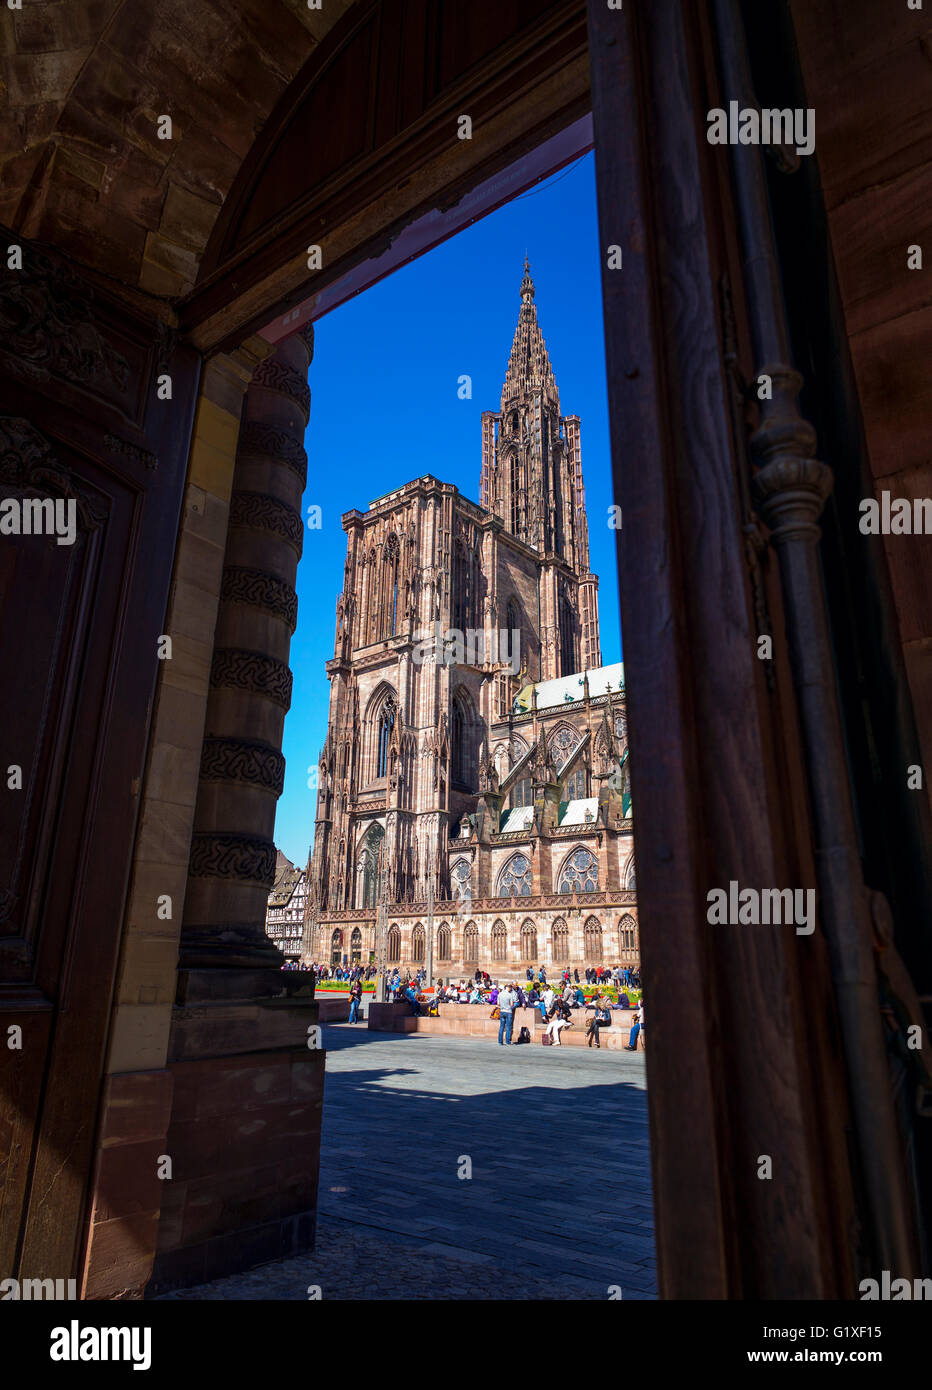 Place du Château square with Notre-Dame gothic cathedral 14th century, Strasbourg, Alsace, France, Europe, Stock Photo